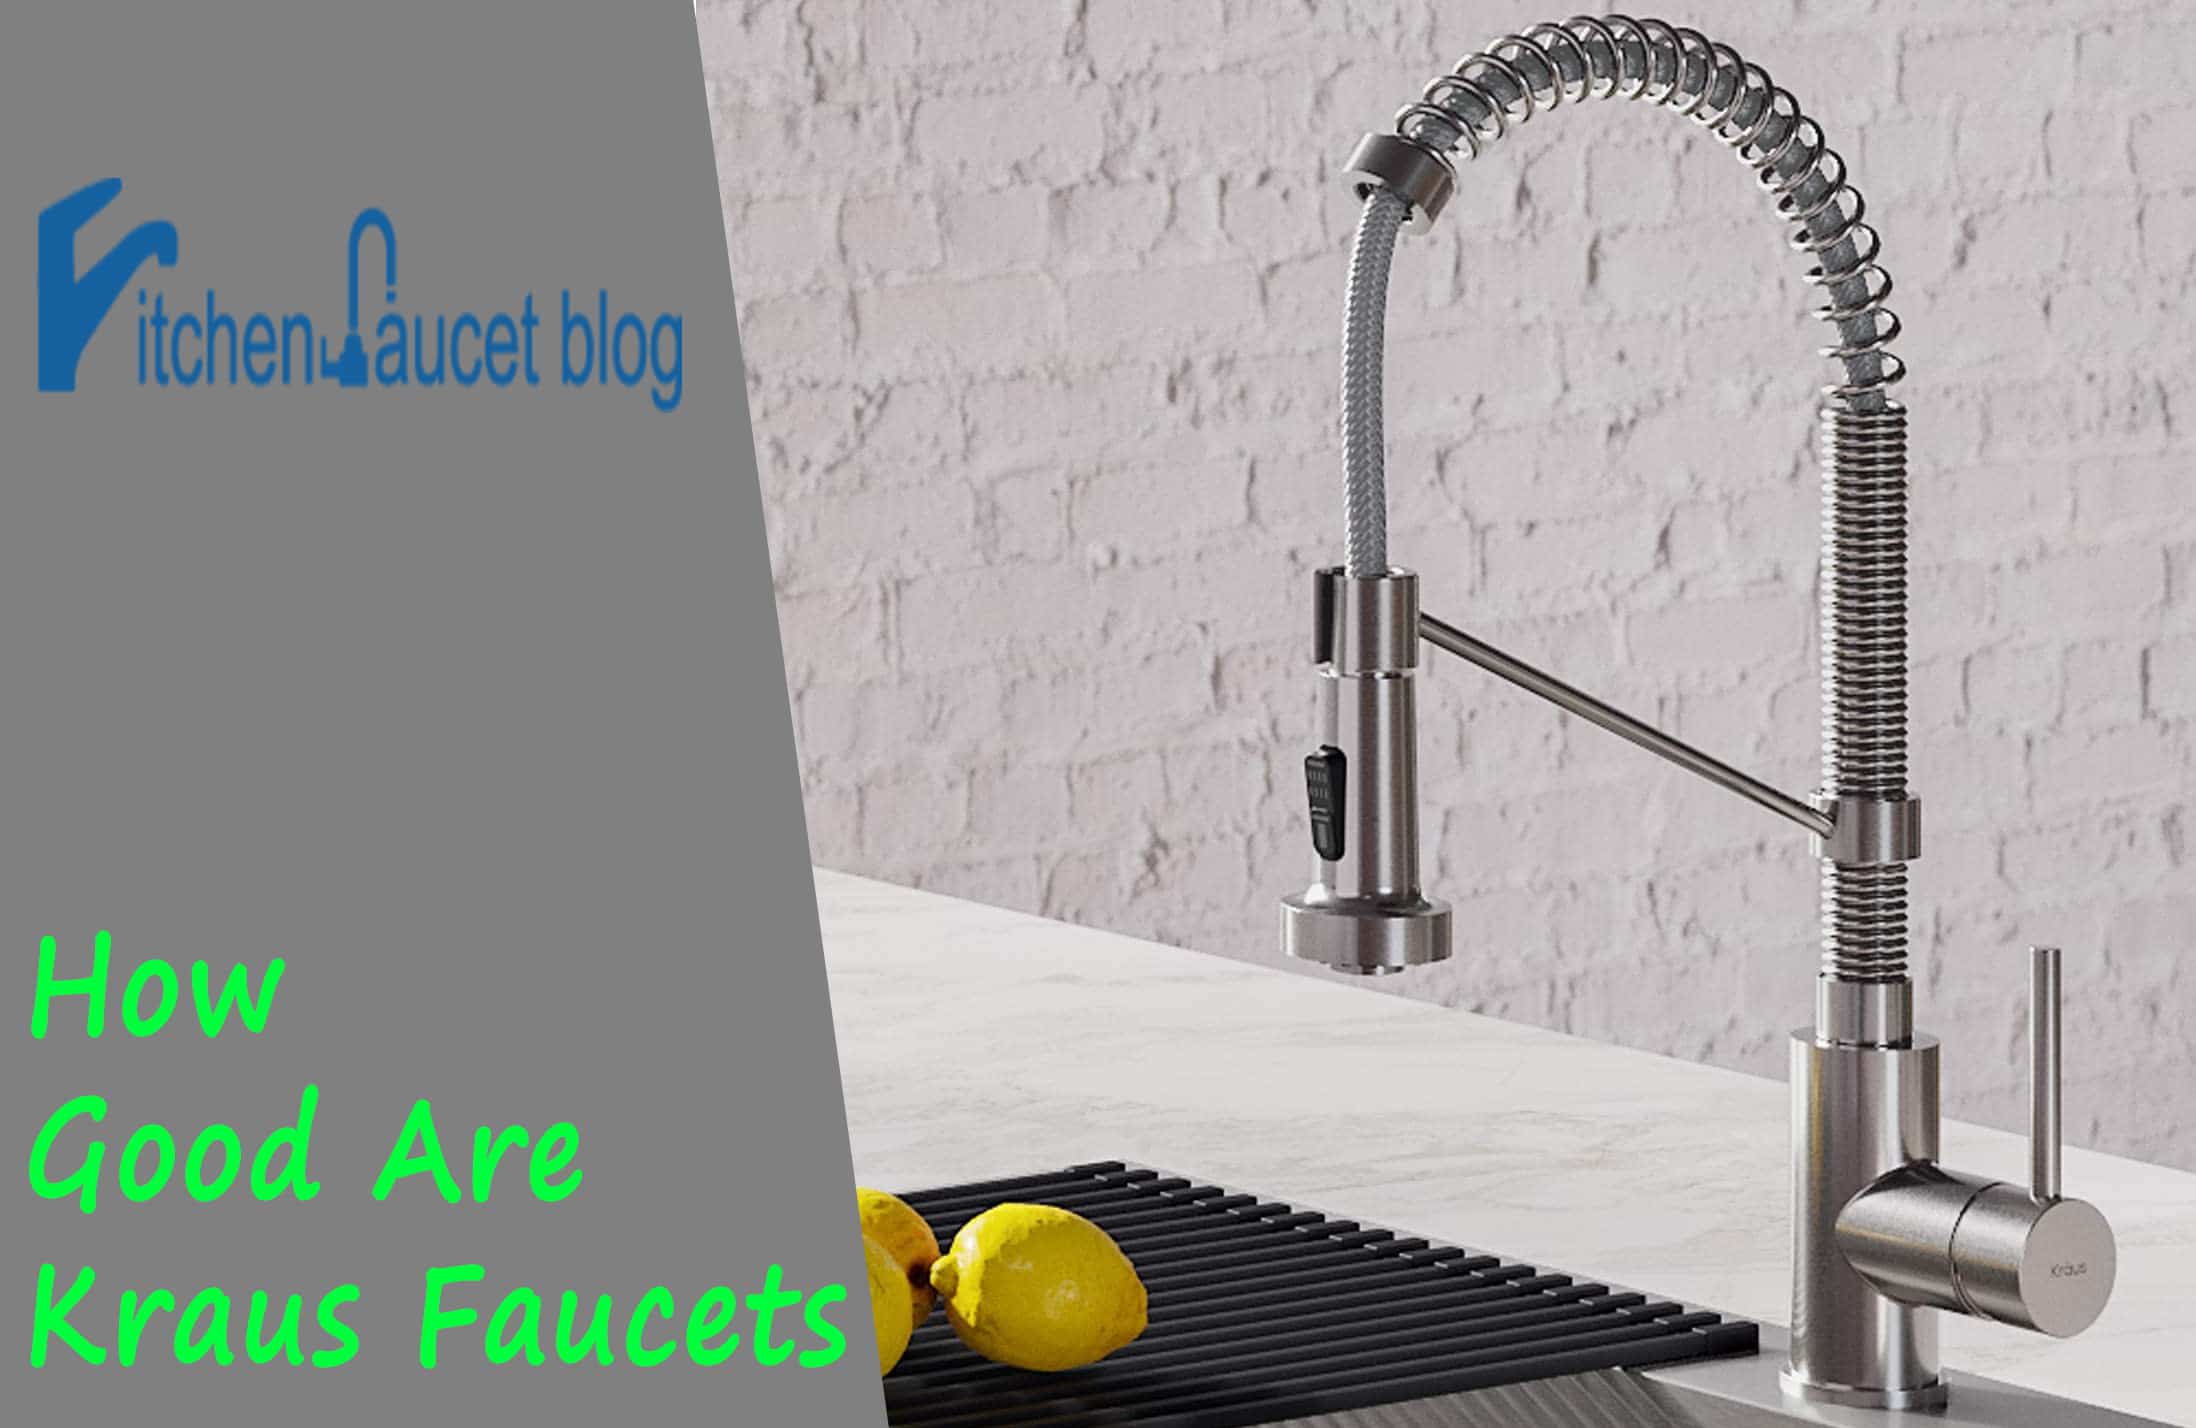 How Good Are Kraus Faucets